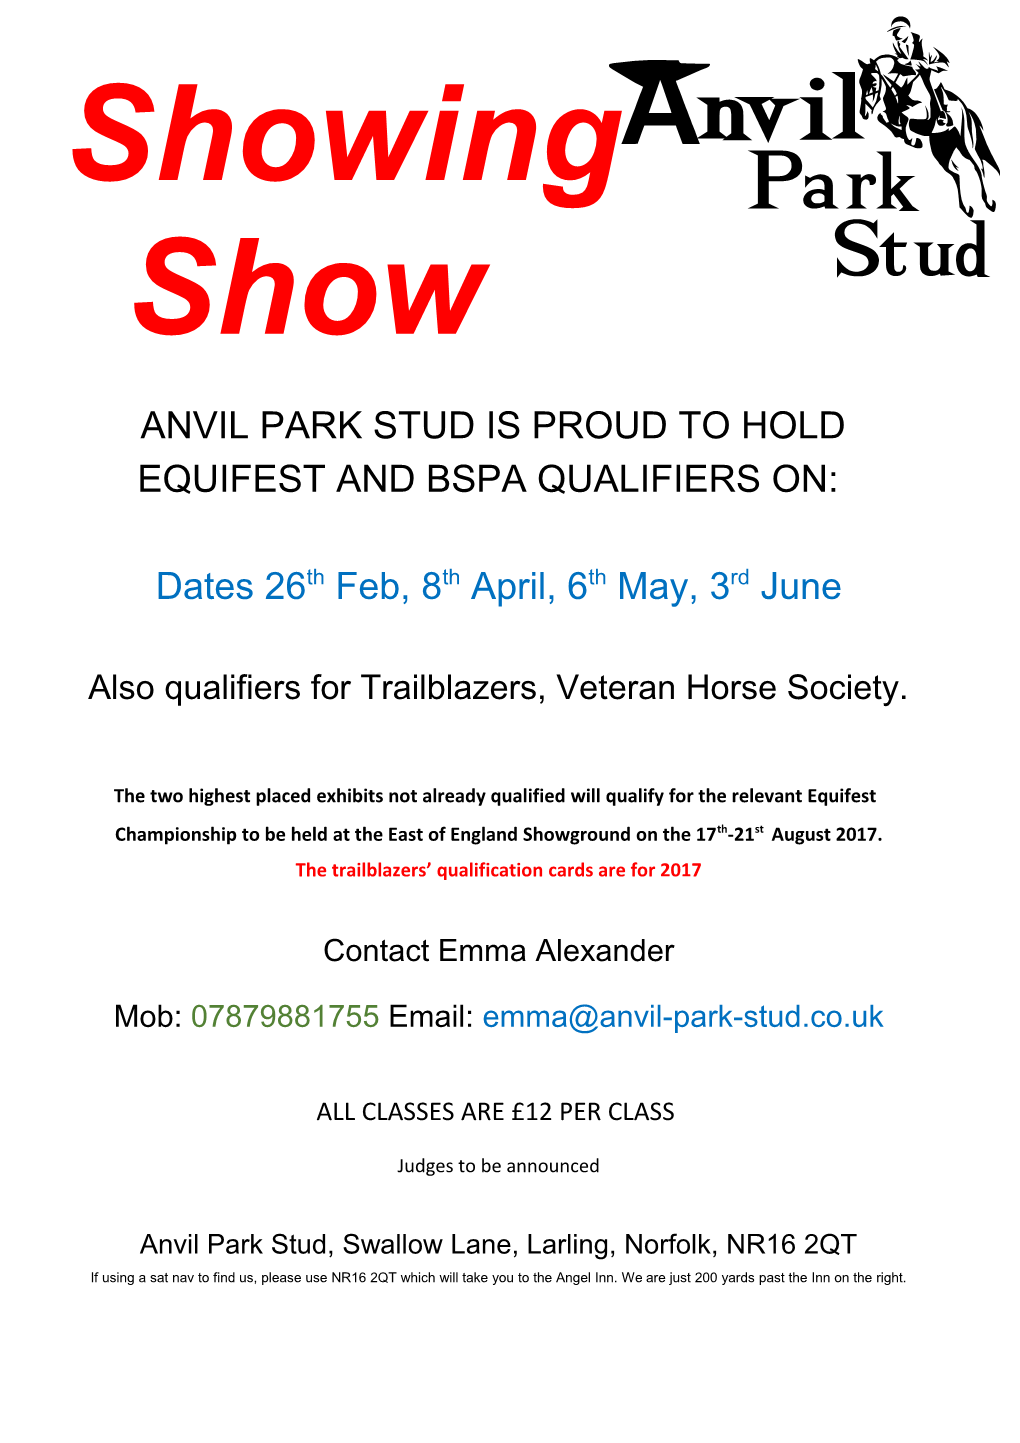 Anvil Park Stud Is Proud to Hold